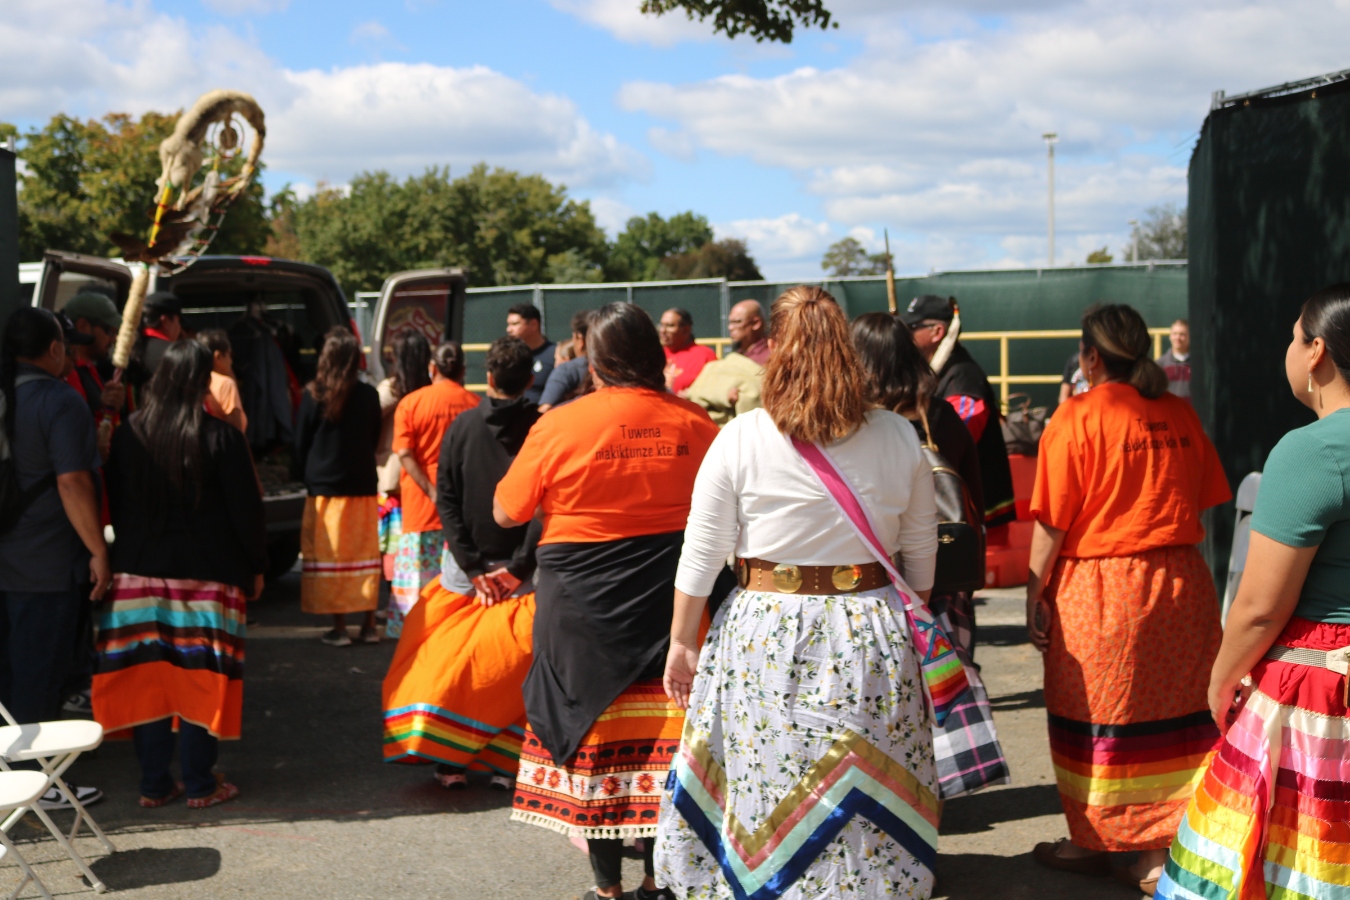 The final moments of Tuesday’s dignified transfer ceremony, where tribal members from the Sisseton Wahpeton Oyate and Spirit Lake Nations welcomed their relatives into the vehicle that would take them home for reburial. (Photo: Jenna Kunze)